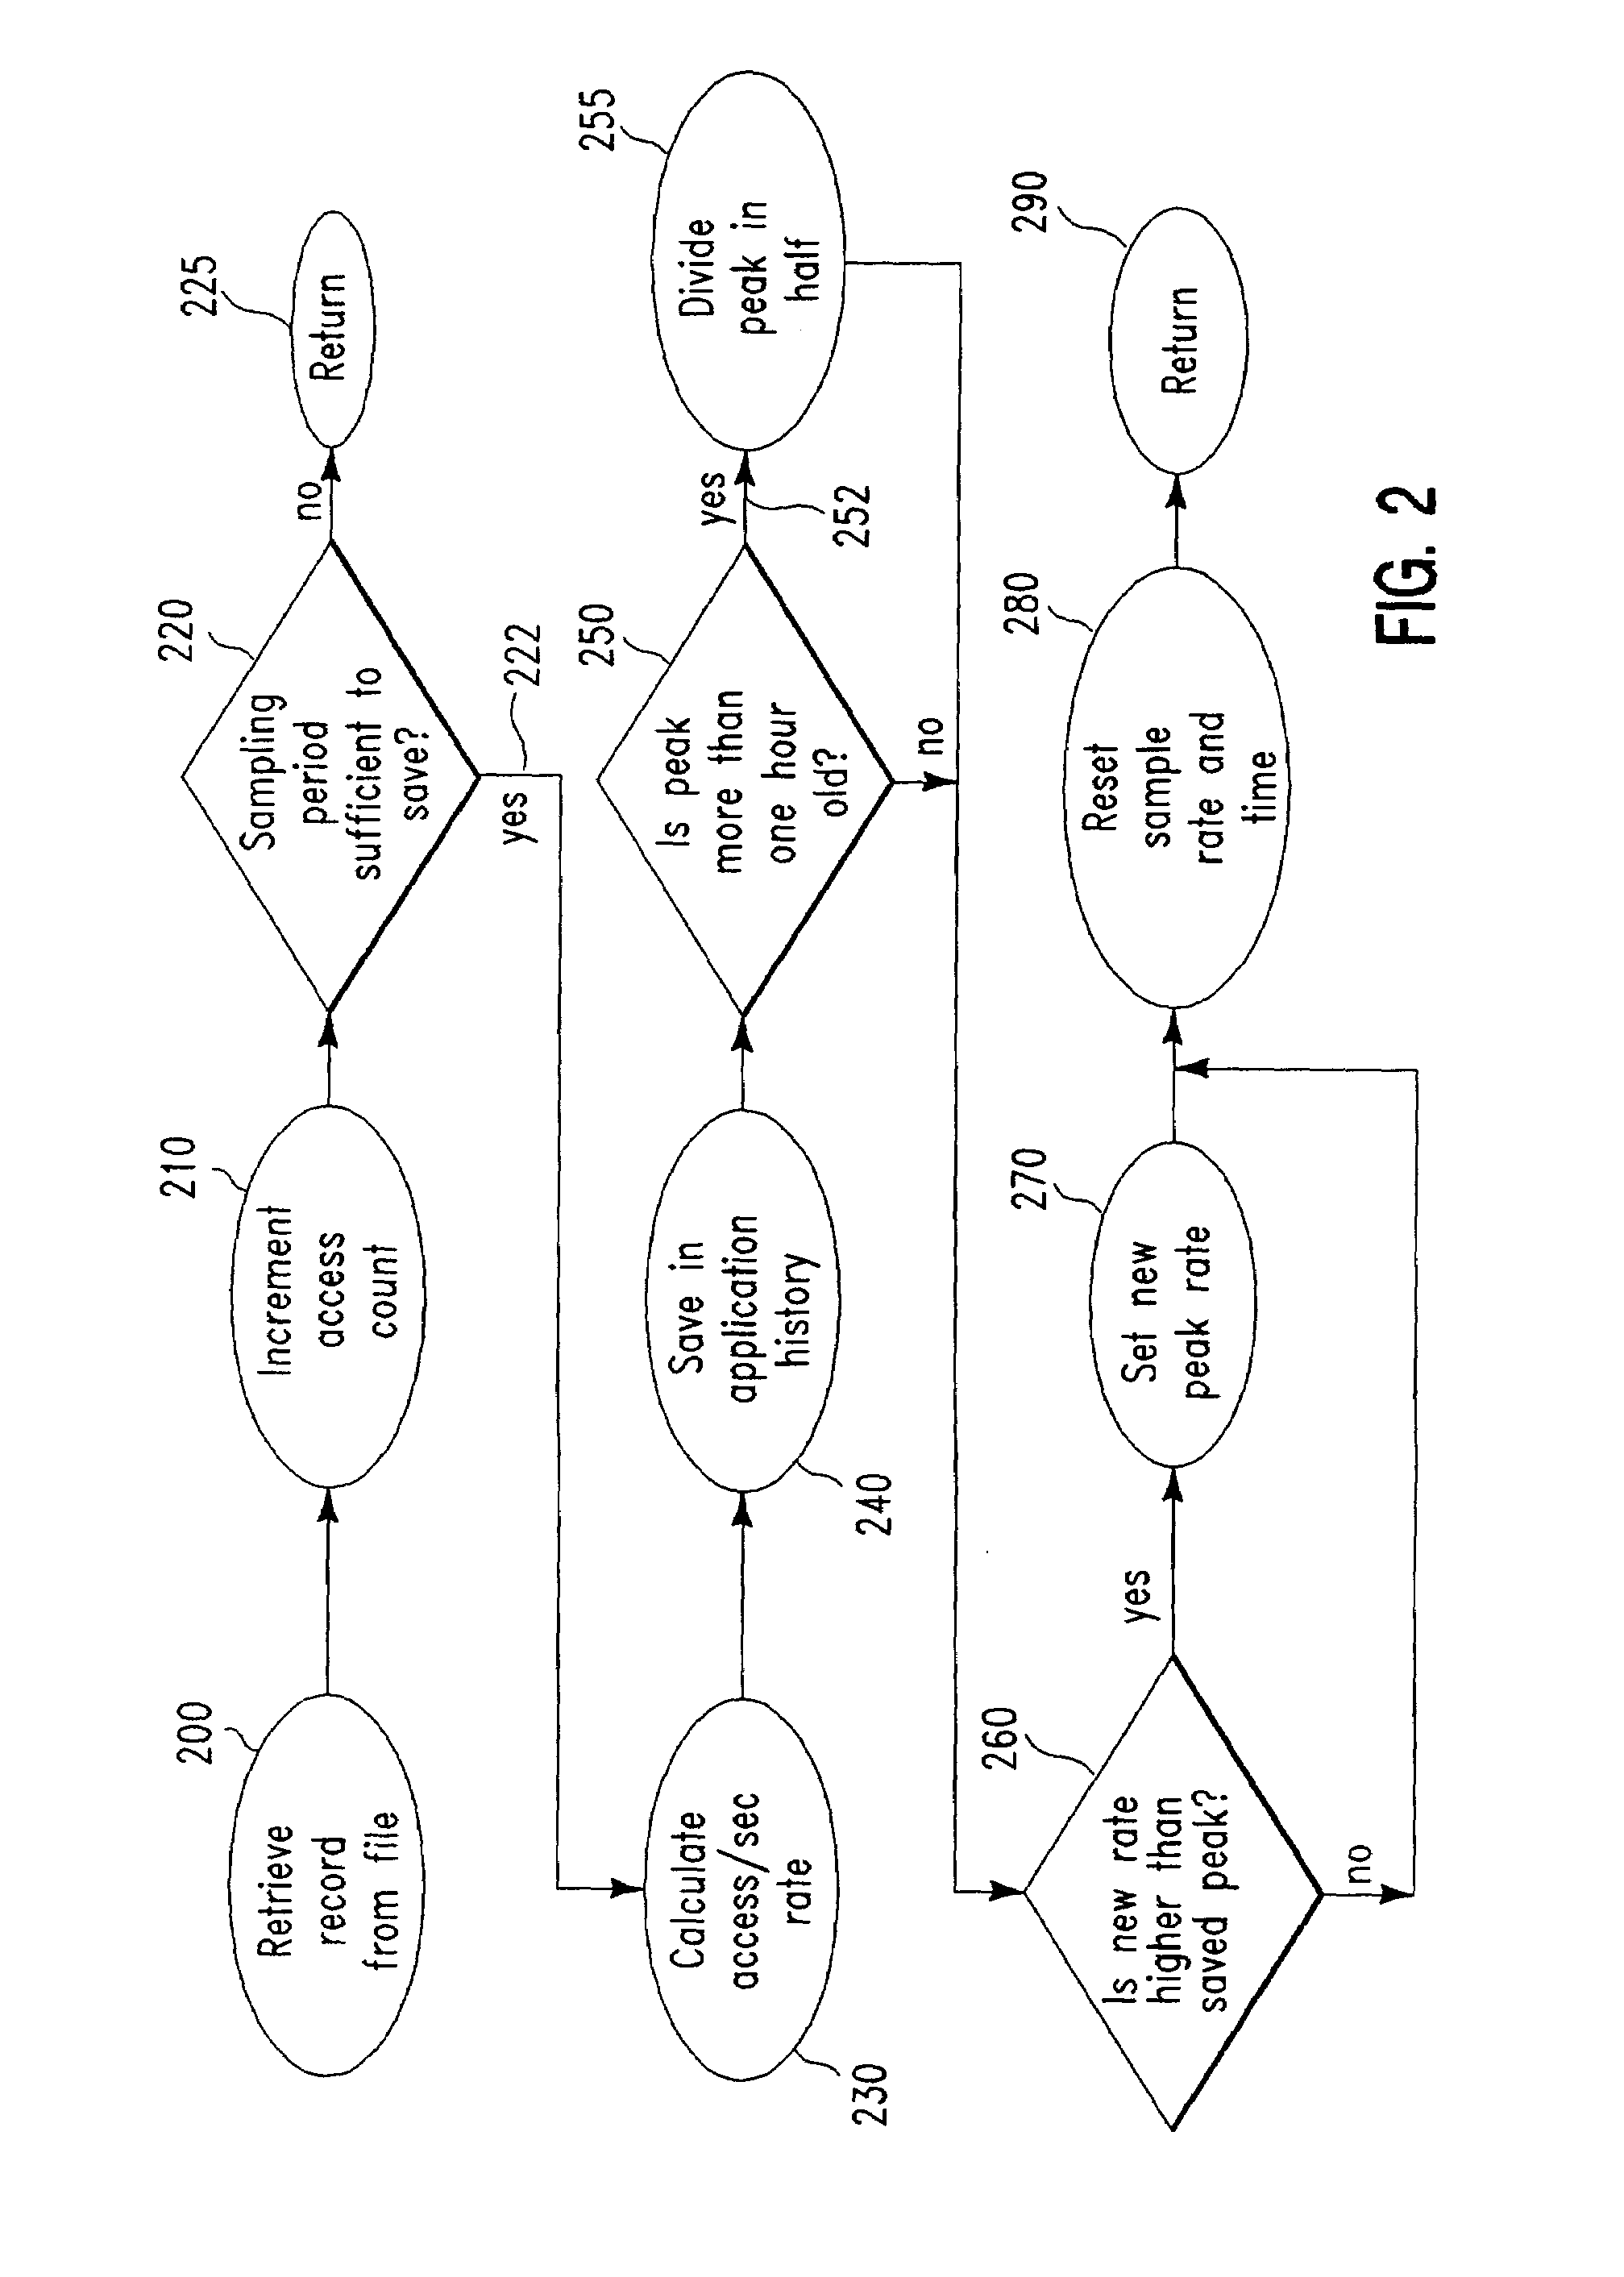 Structure and method for efficient management of memory resources